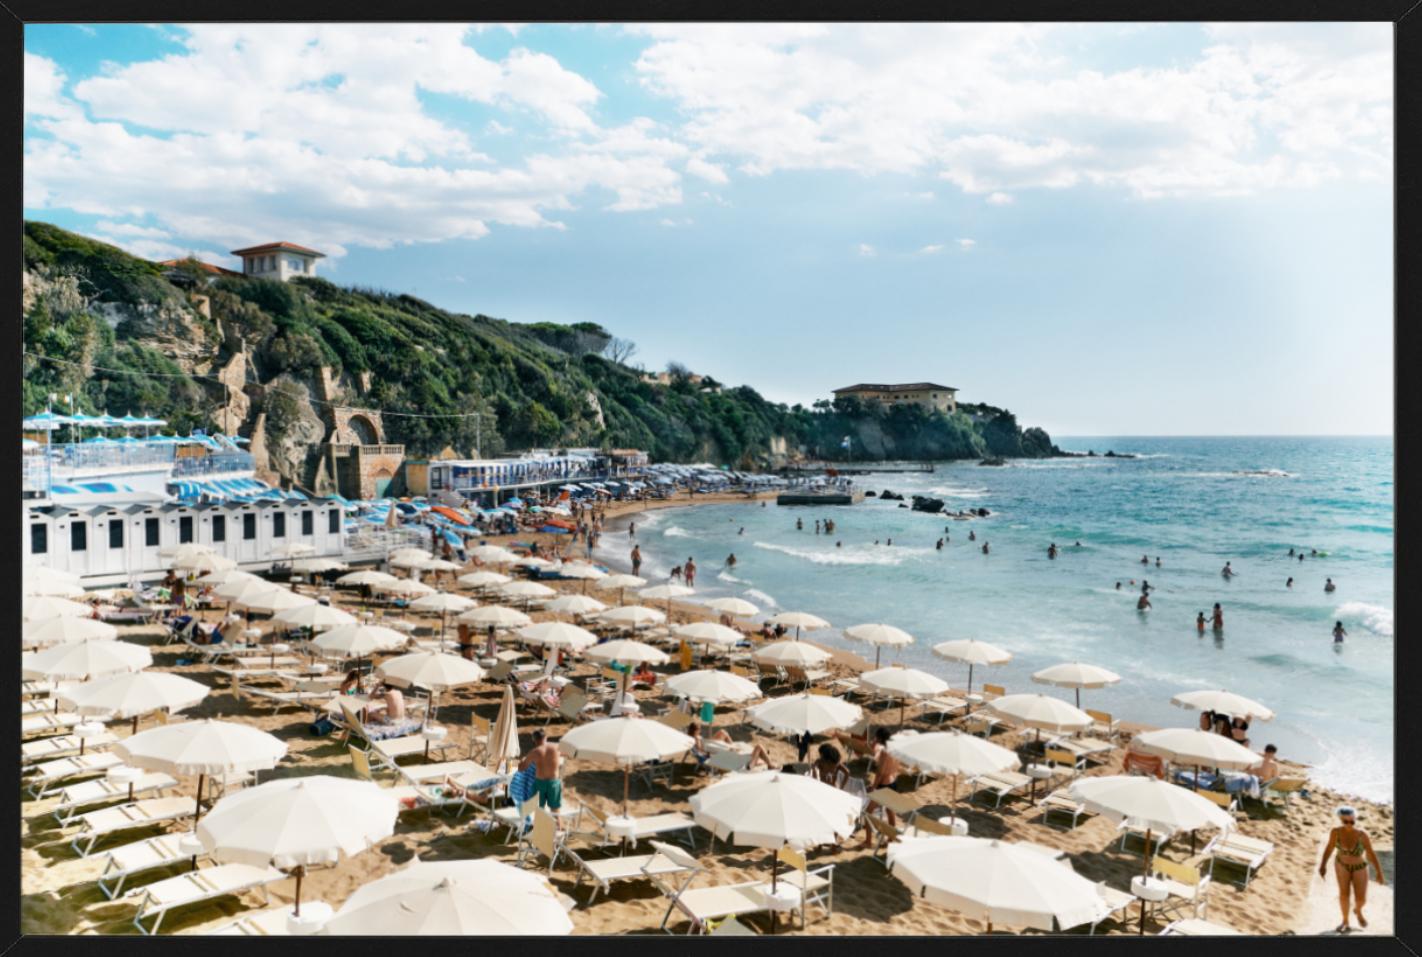 Quercetano Italy Uno- Beach and Sea View with Umbrellas, People, and Mountains - Gray Landscape Photograph by Florian Innerkofler